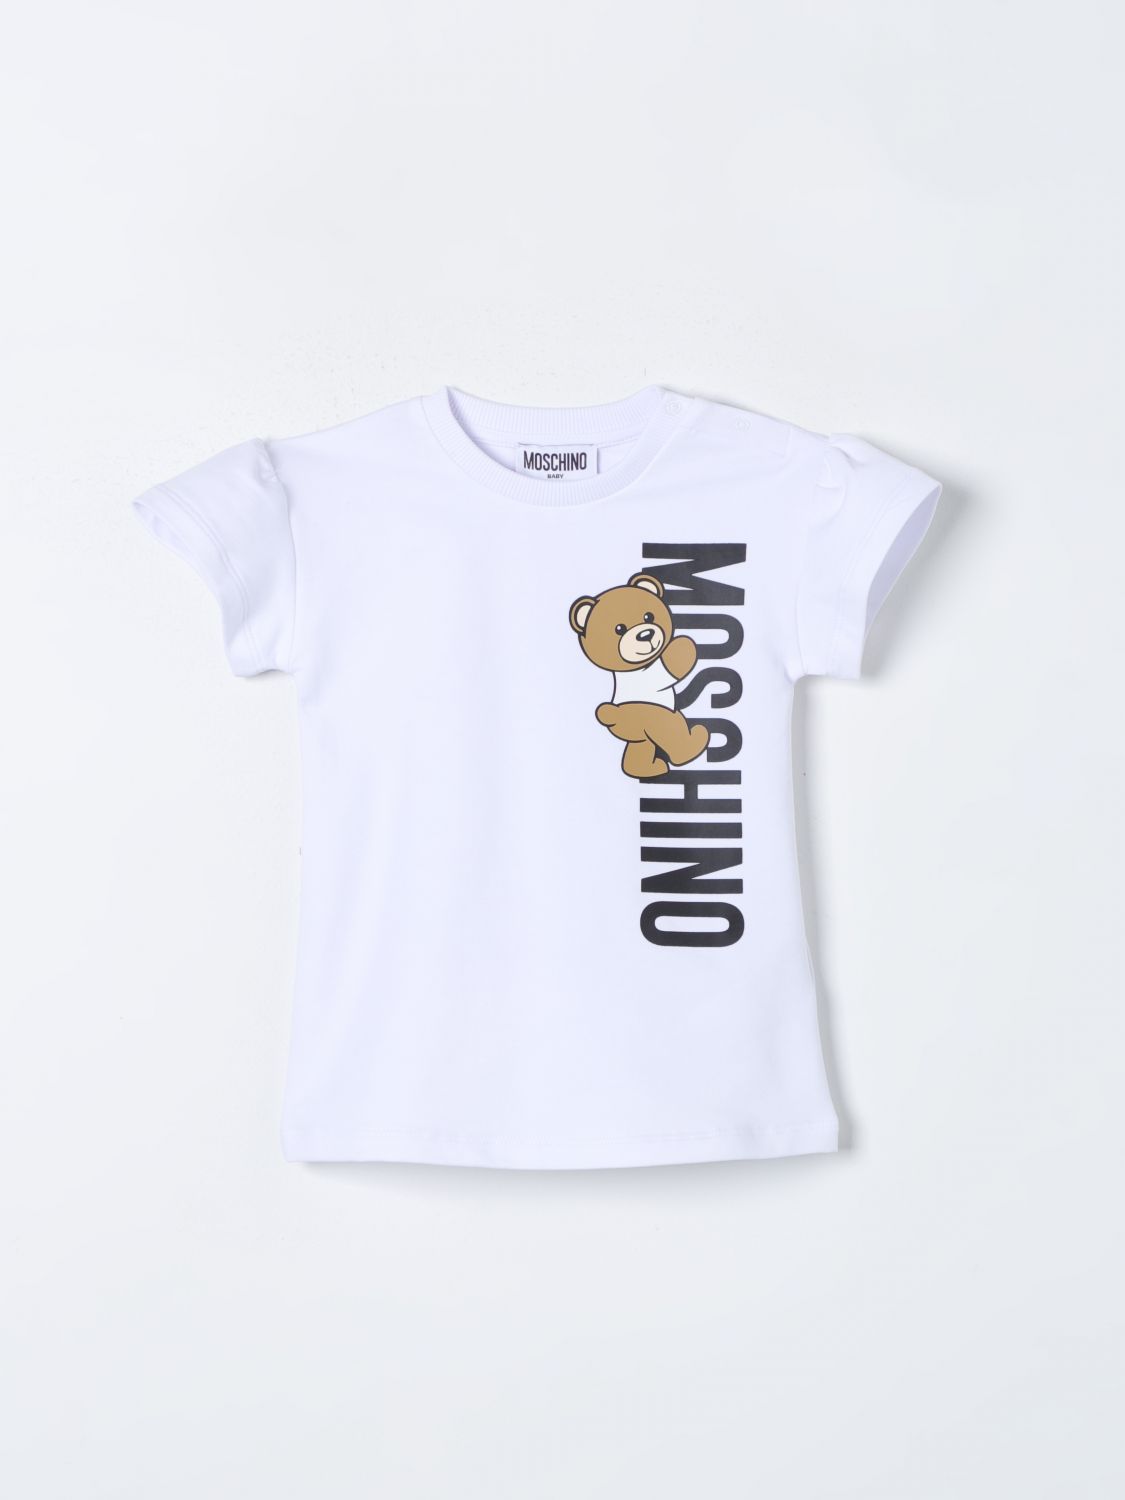 Moschino Baby Romper  Kids Color White